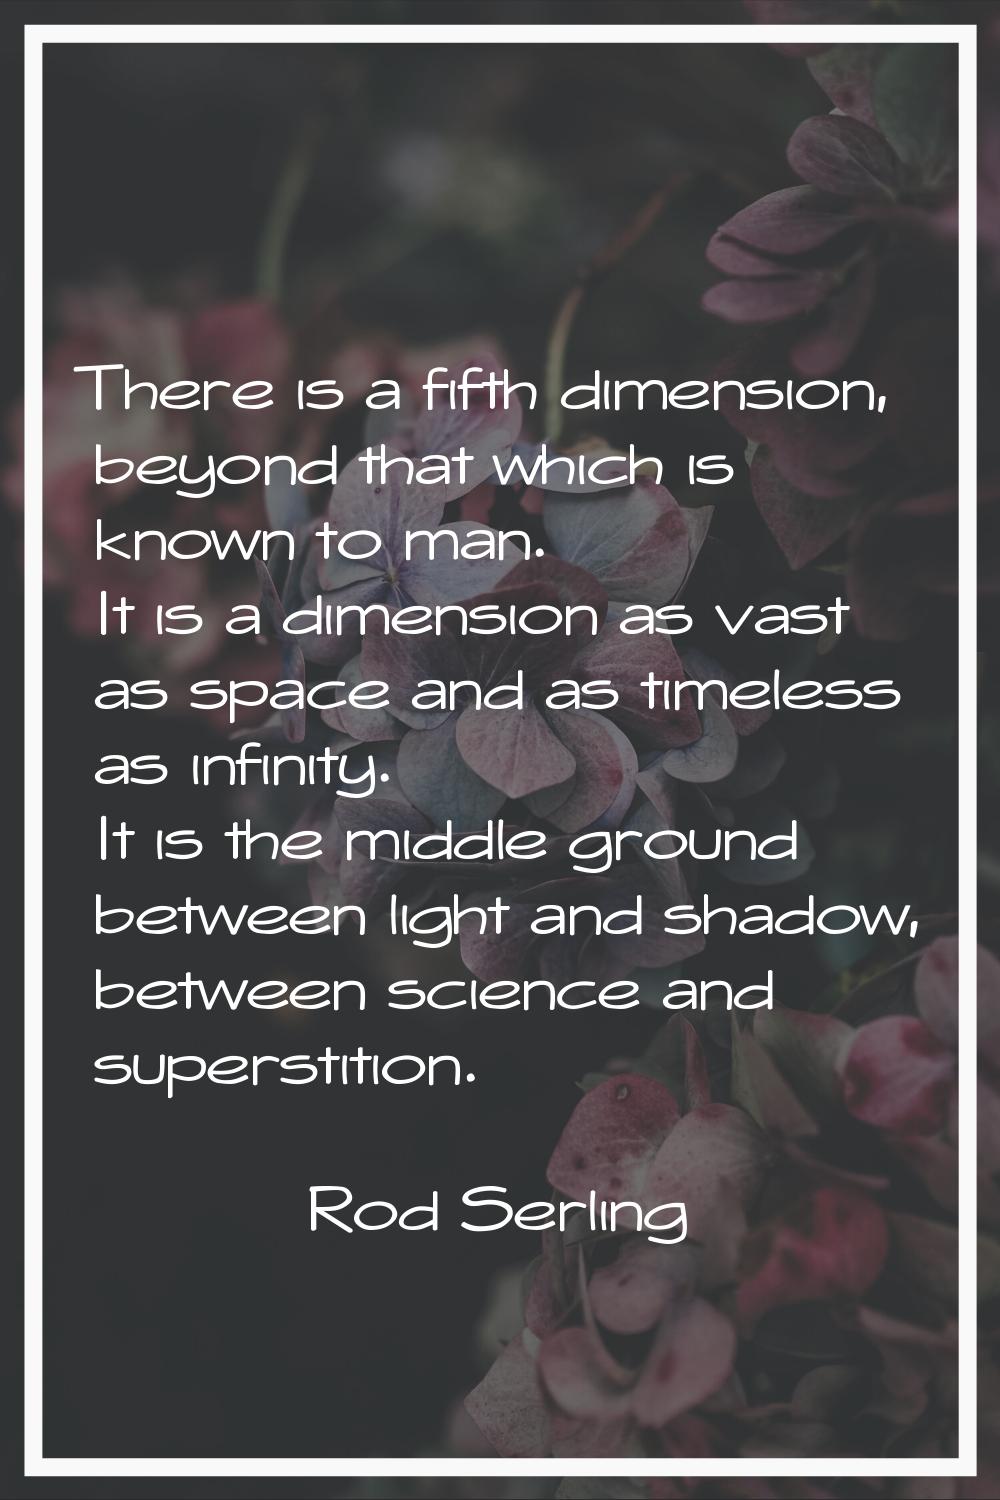 There is a fifth dimension, beyond that which is known to man. It is a dimension as vast as space a